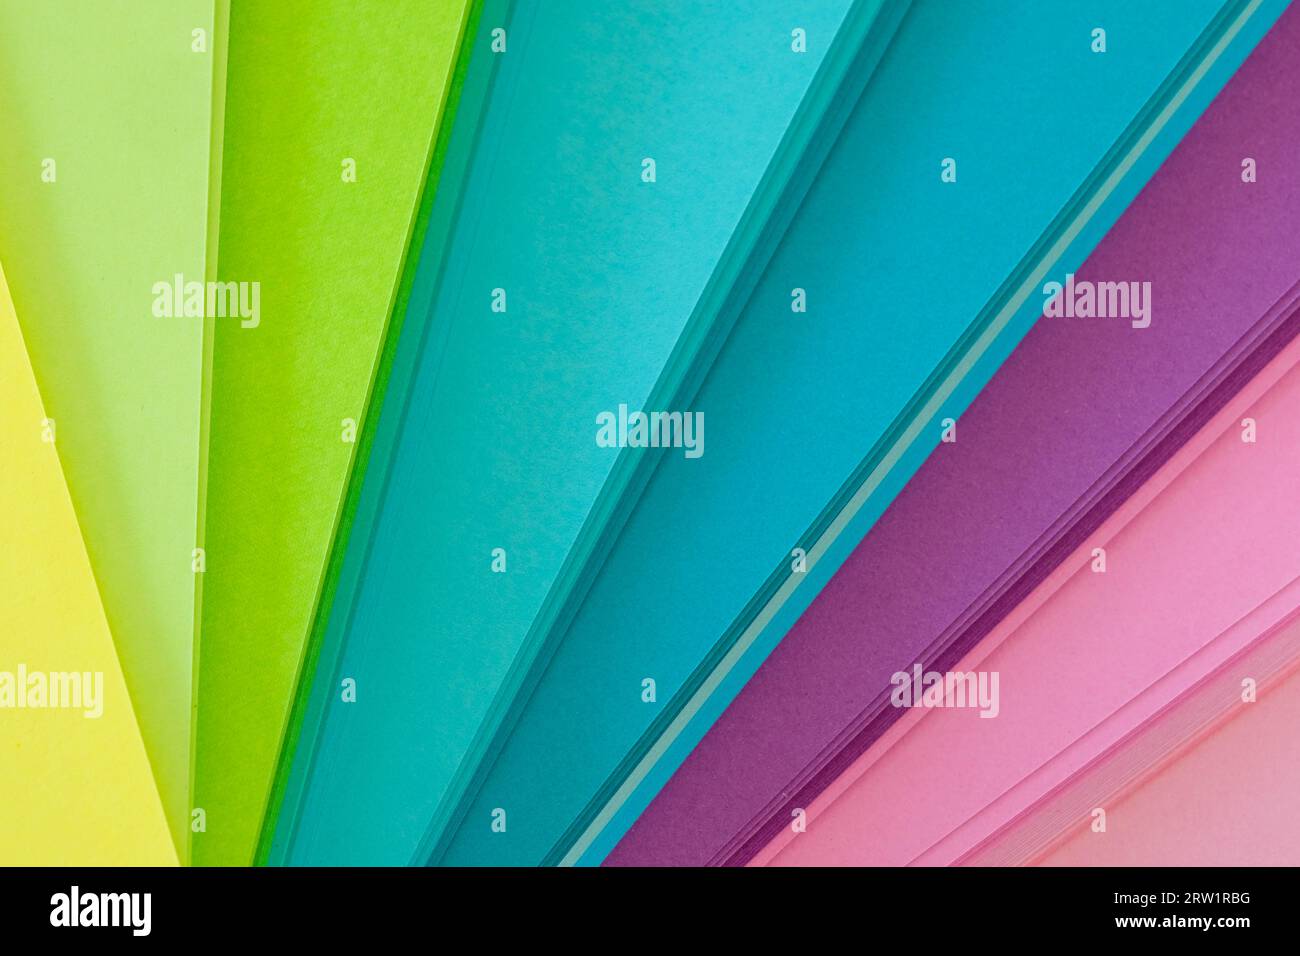 Colored paper in bright tones fanned out Stock Photo